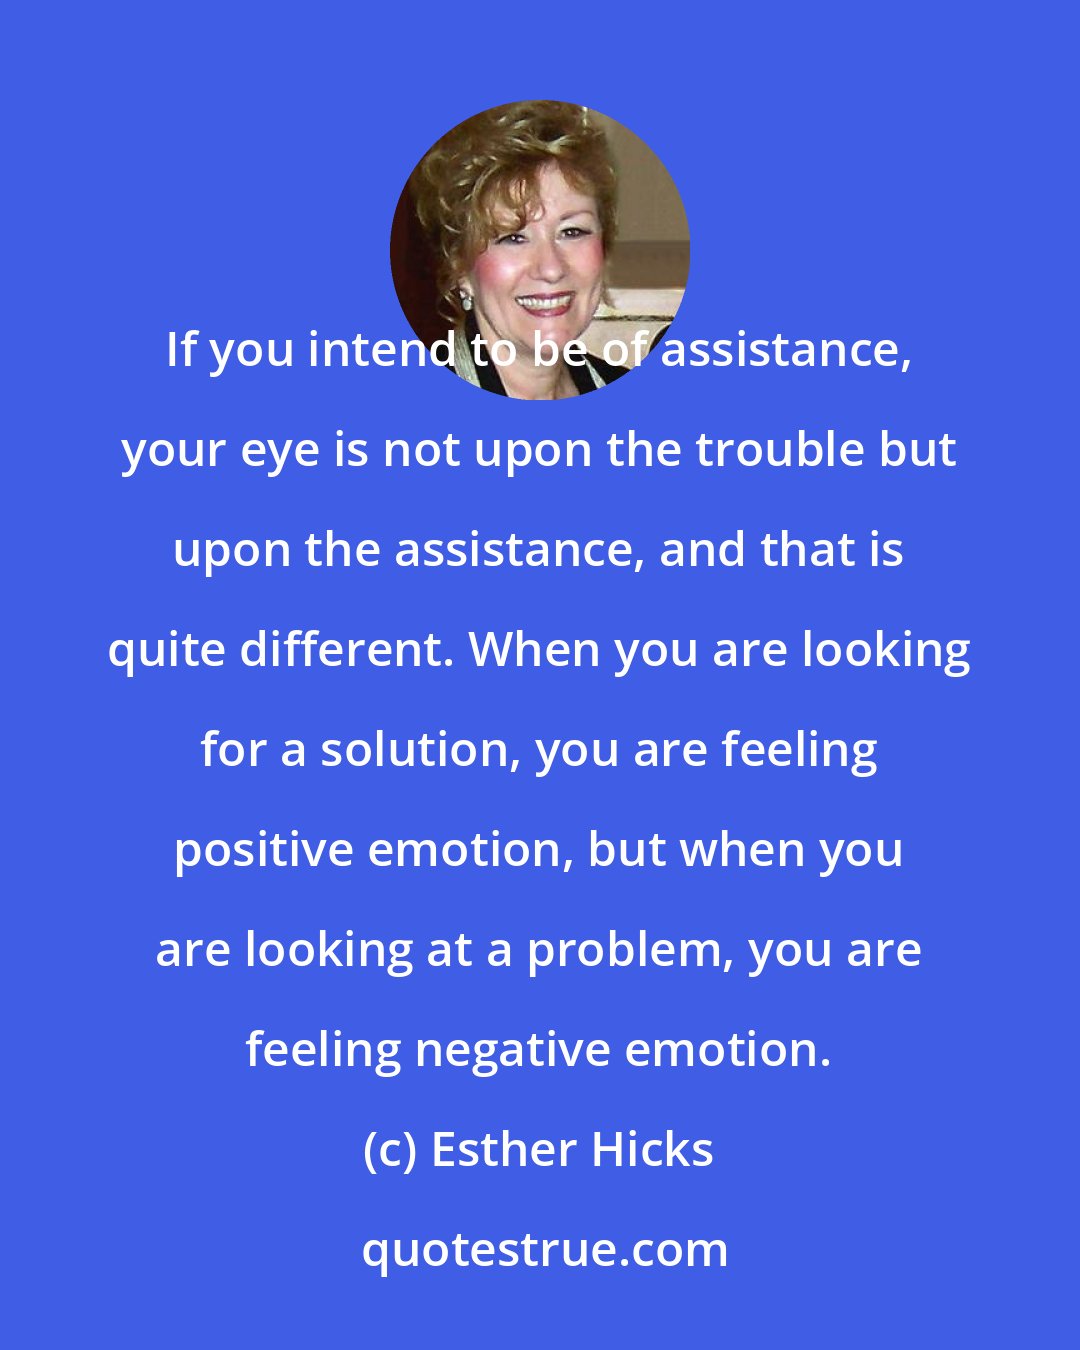 Esther Hicks: If you intend to be of assistance, your eye is not upon the trouble but upon the assistance, and that is quite different. When you are looking for a solution, you are feeling positive emotion, but when you are looking at a problem, you are feeling negative emotion.